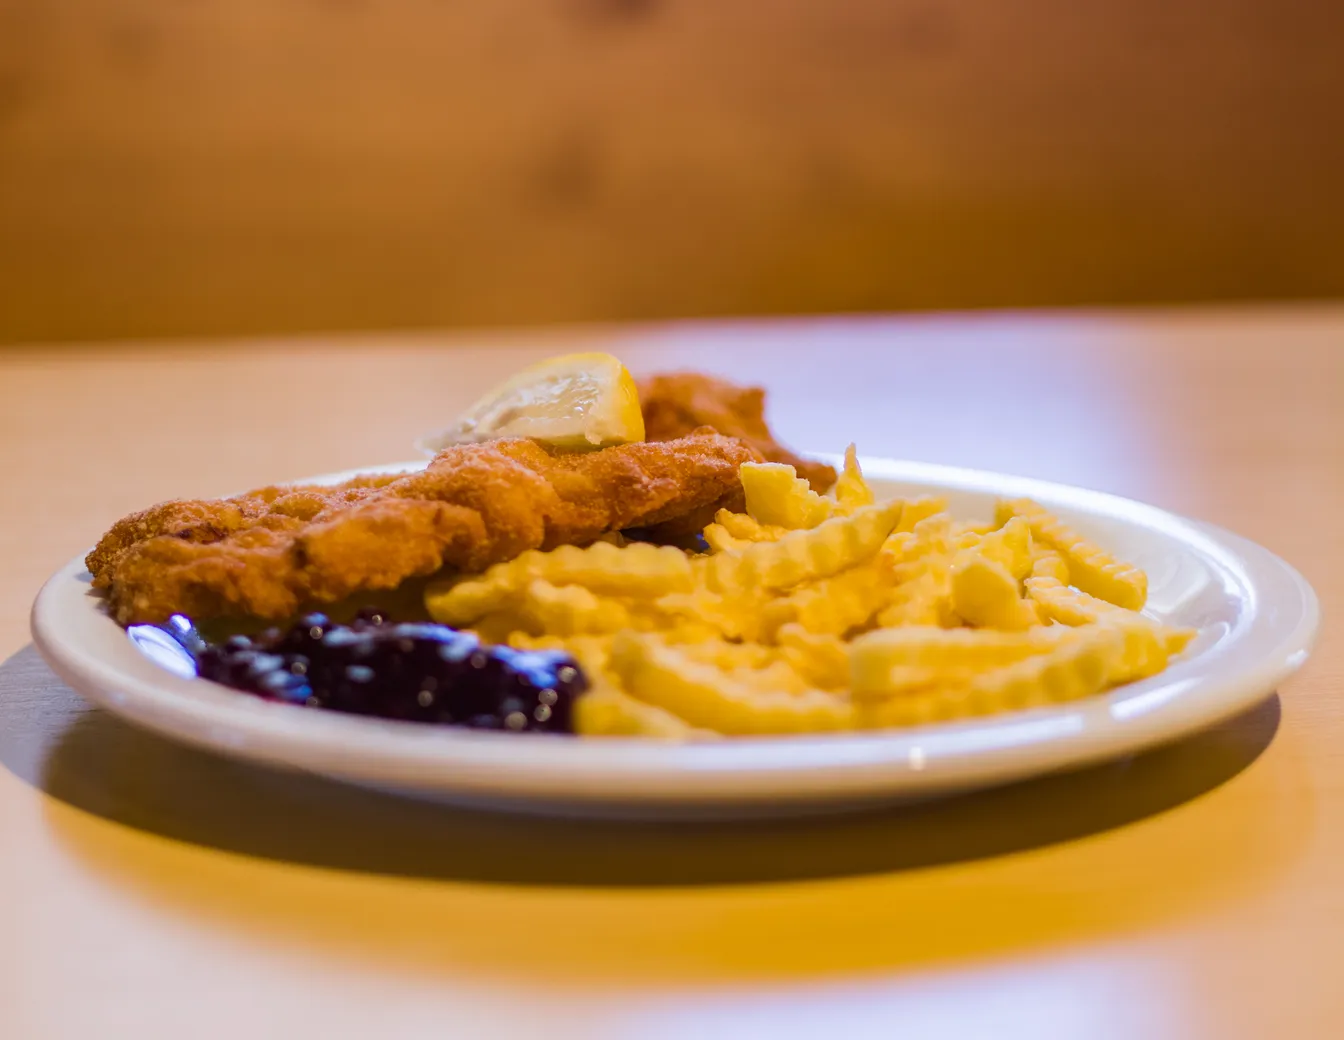 A Wiener Schnitzel with french fries and cranberry jam